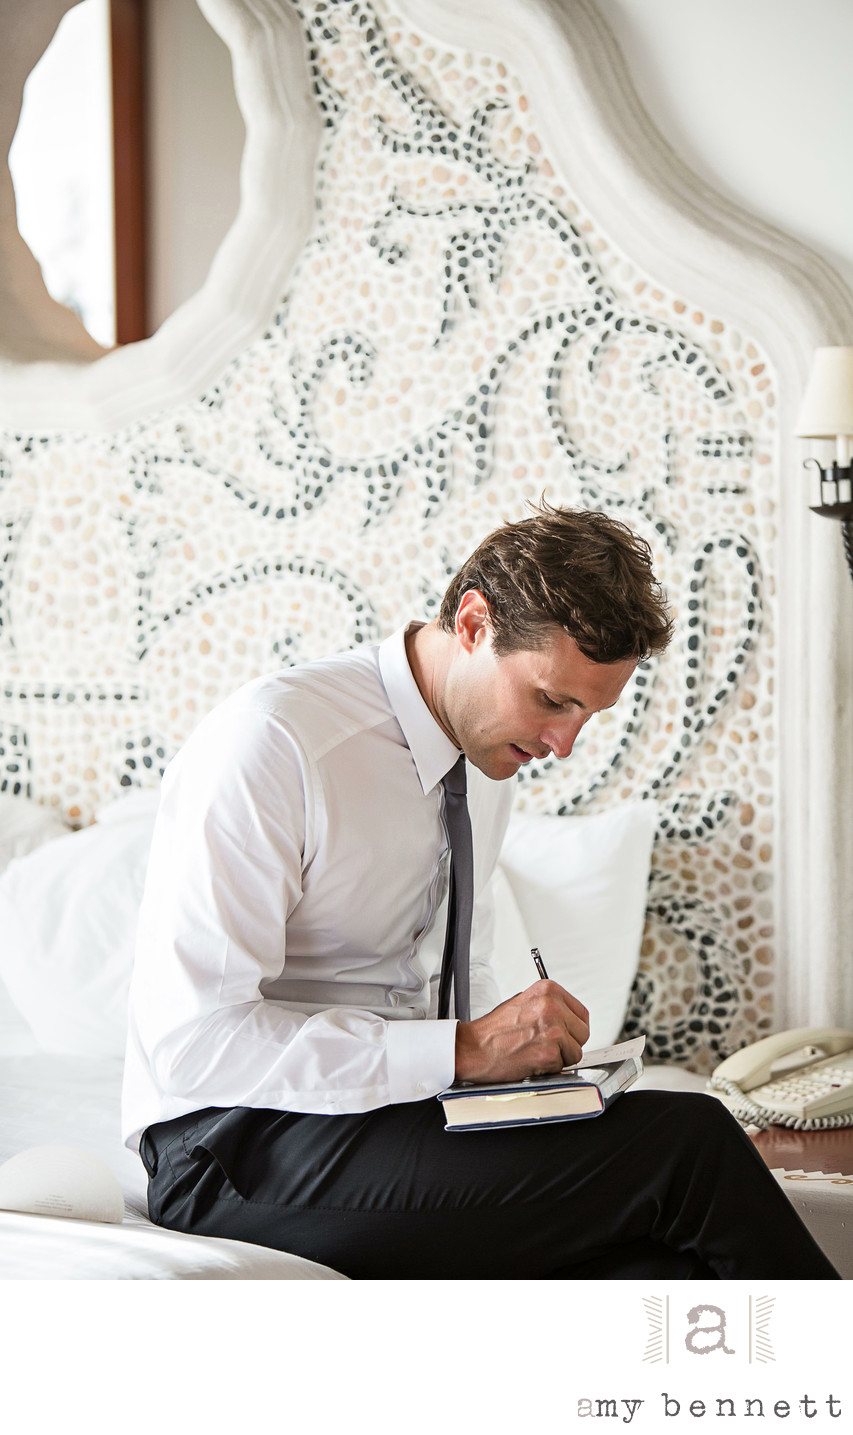 Groom Writing Note for Bride